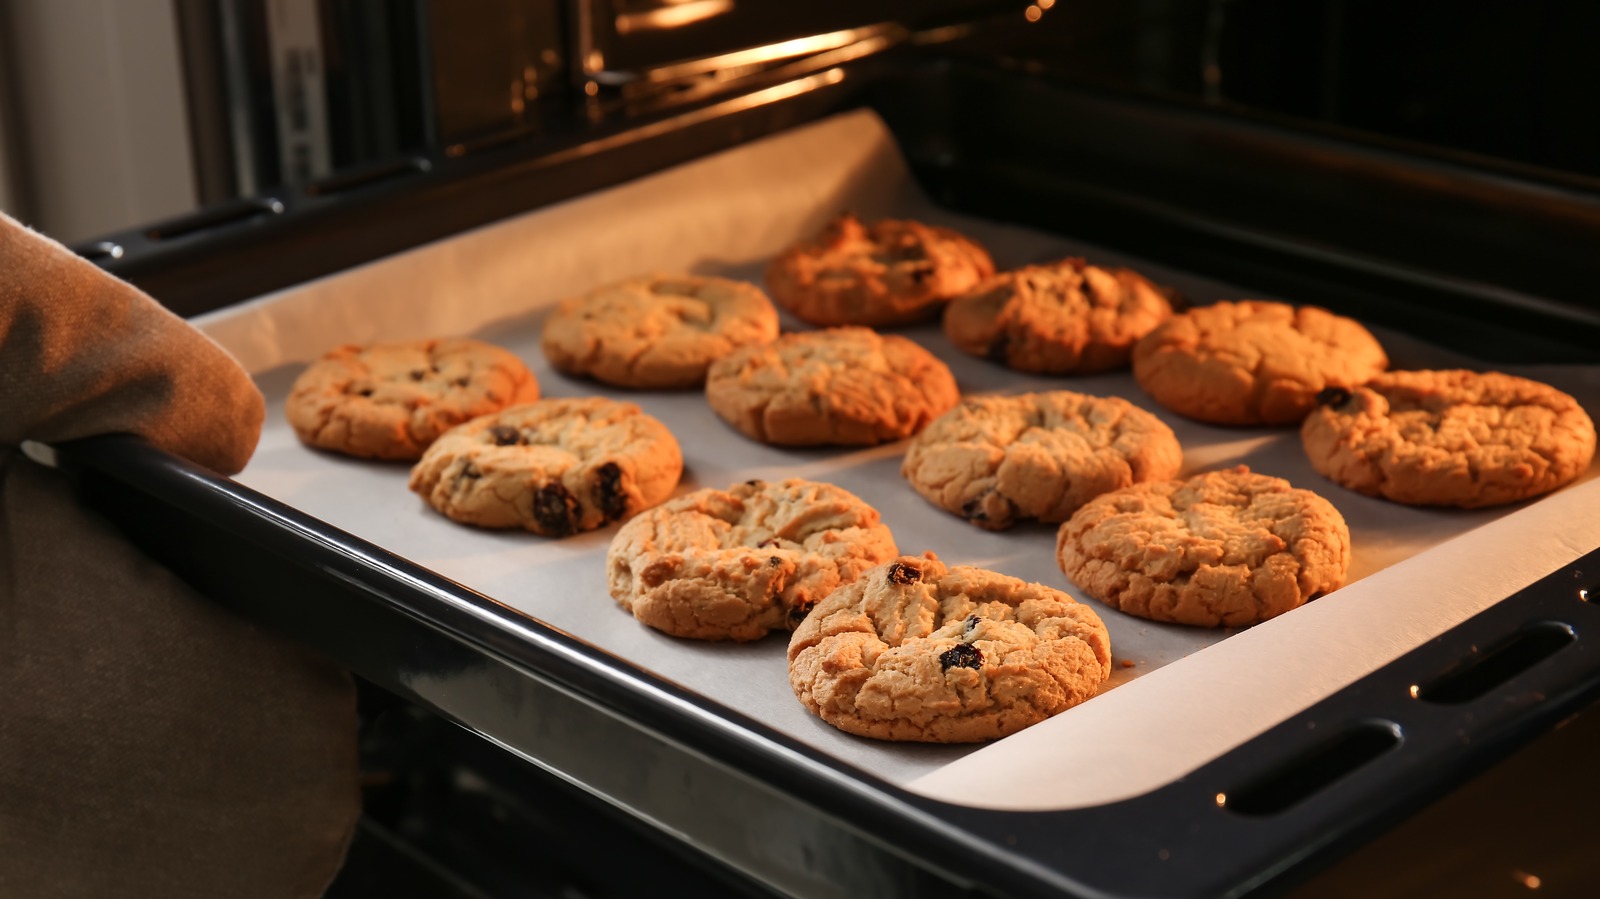 Why You May Want To Avoid Insulated Cookie Sheets